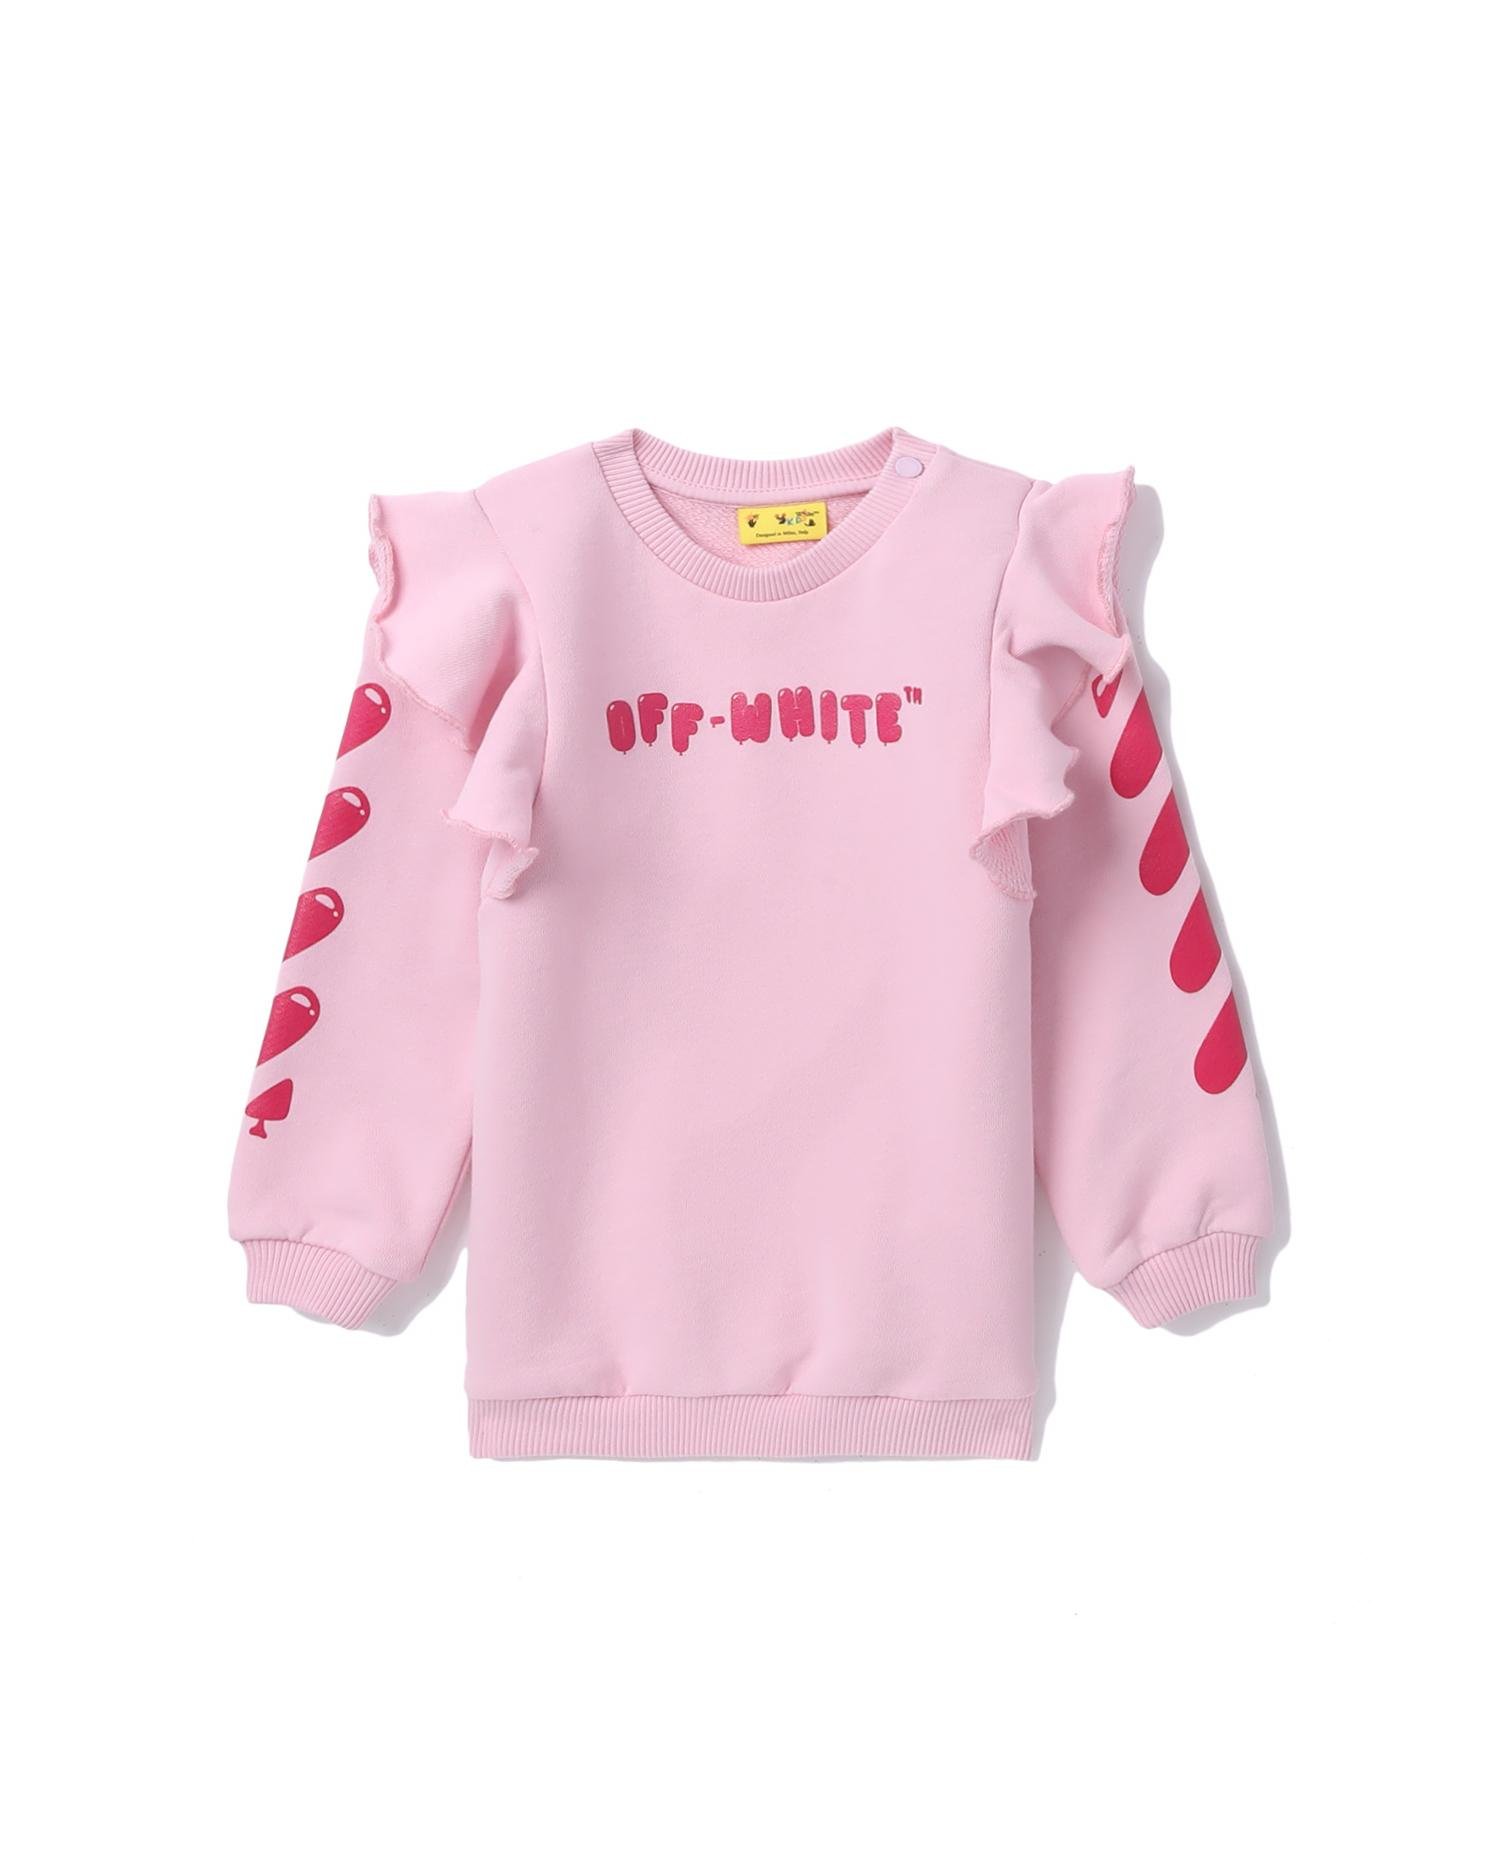 Kids printed top by OFF-WHITE